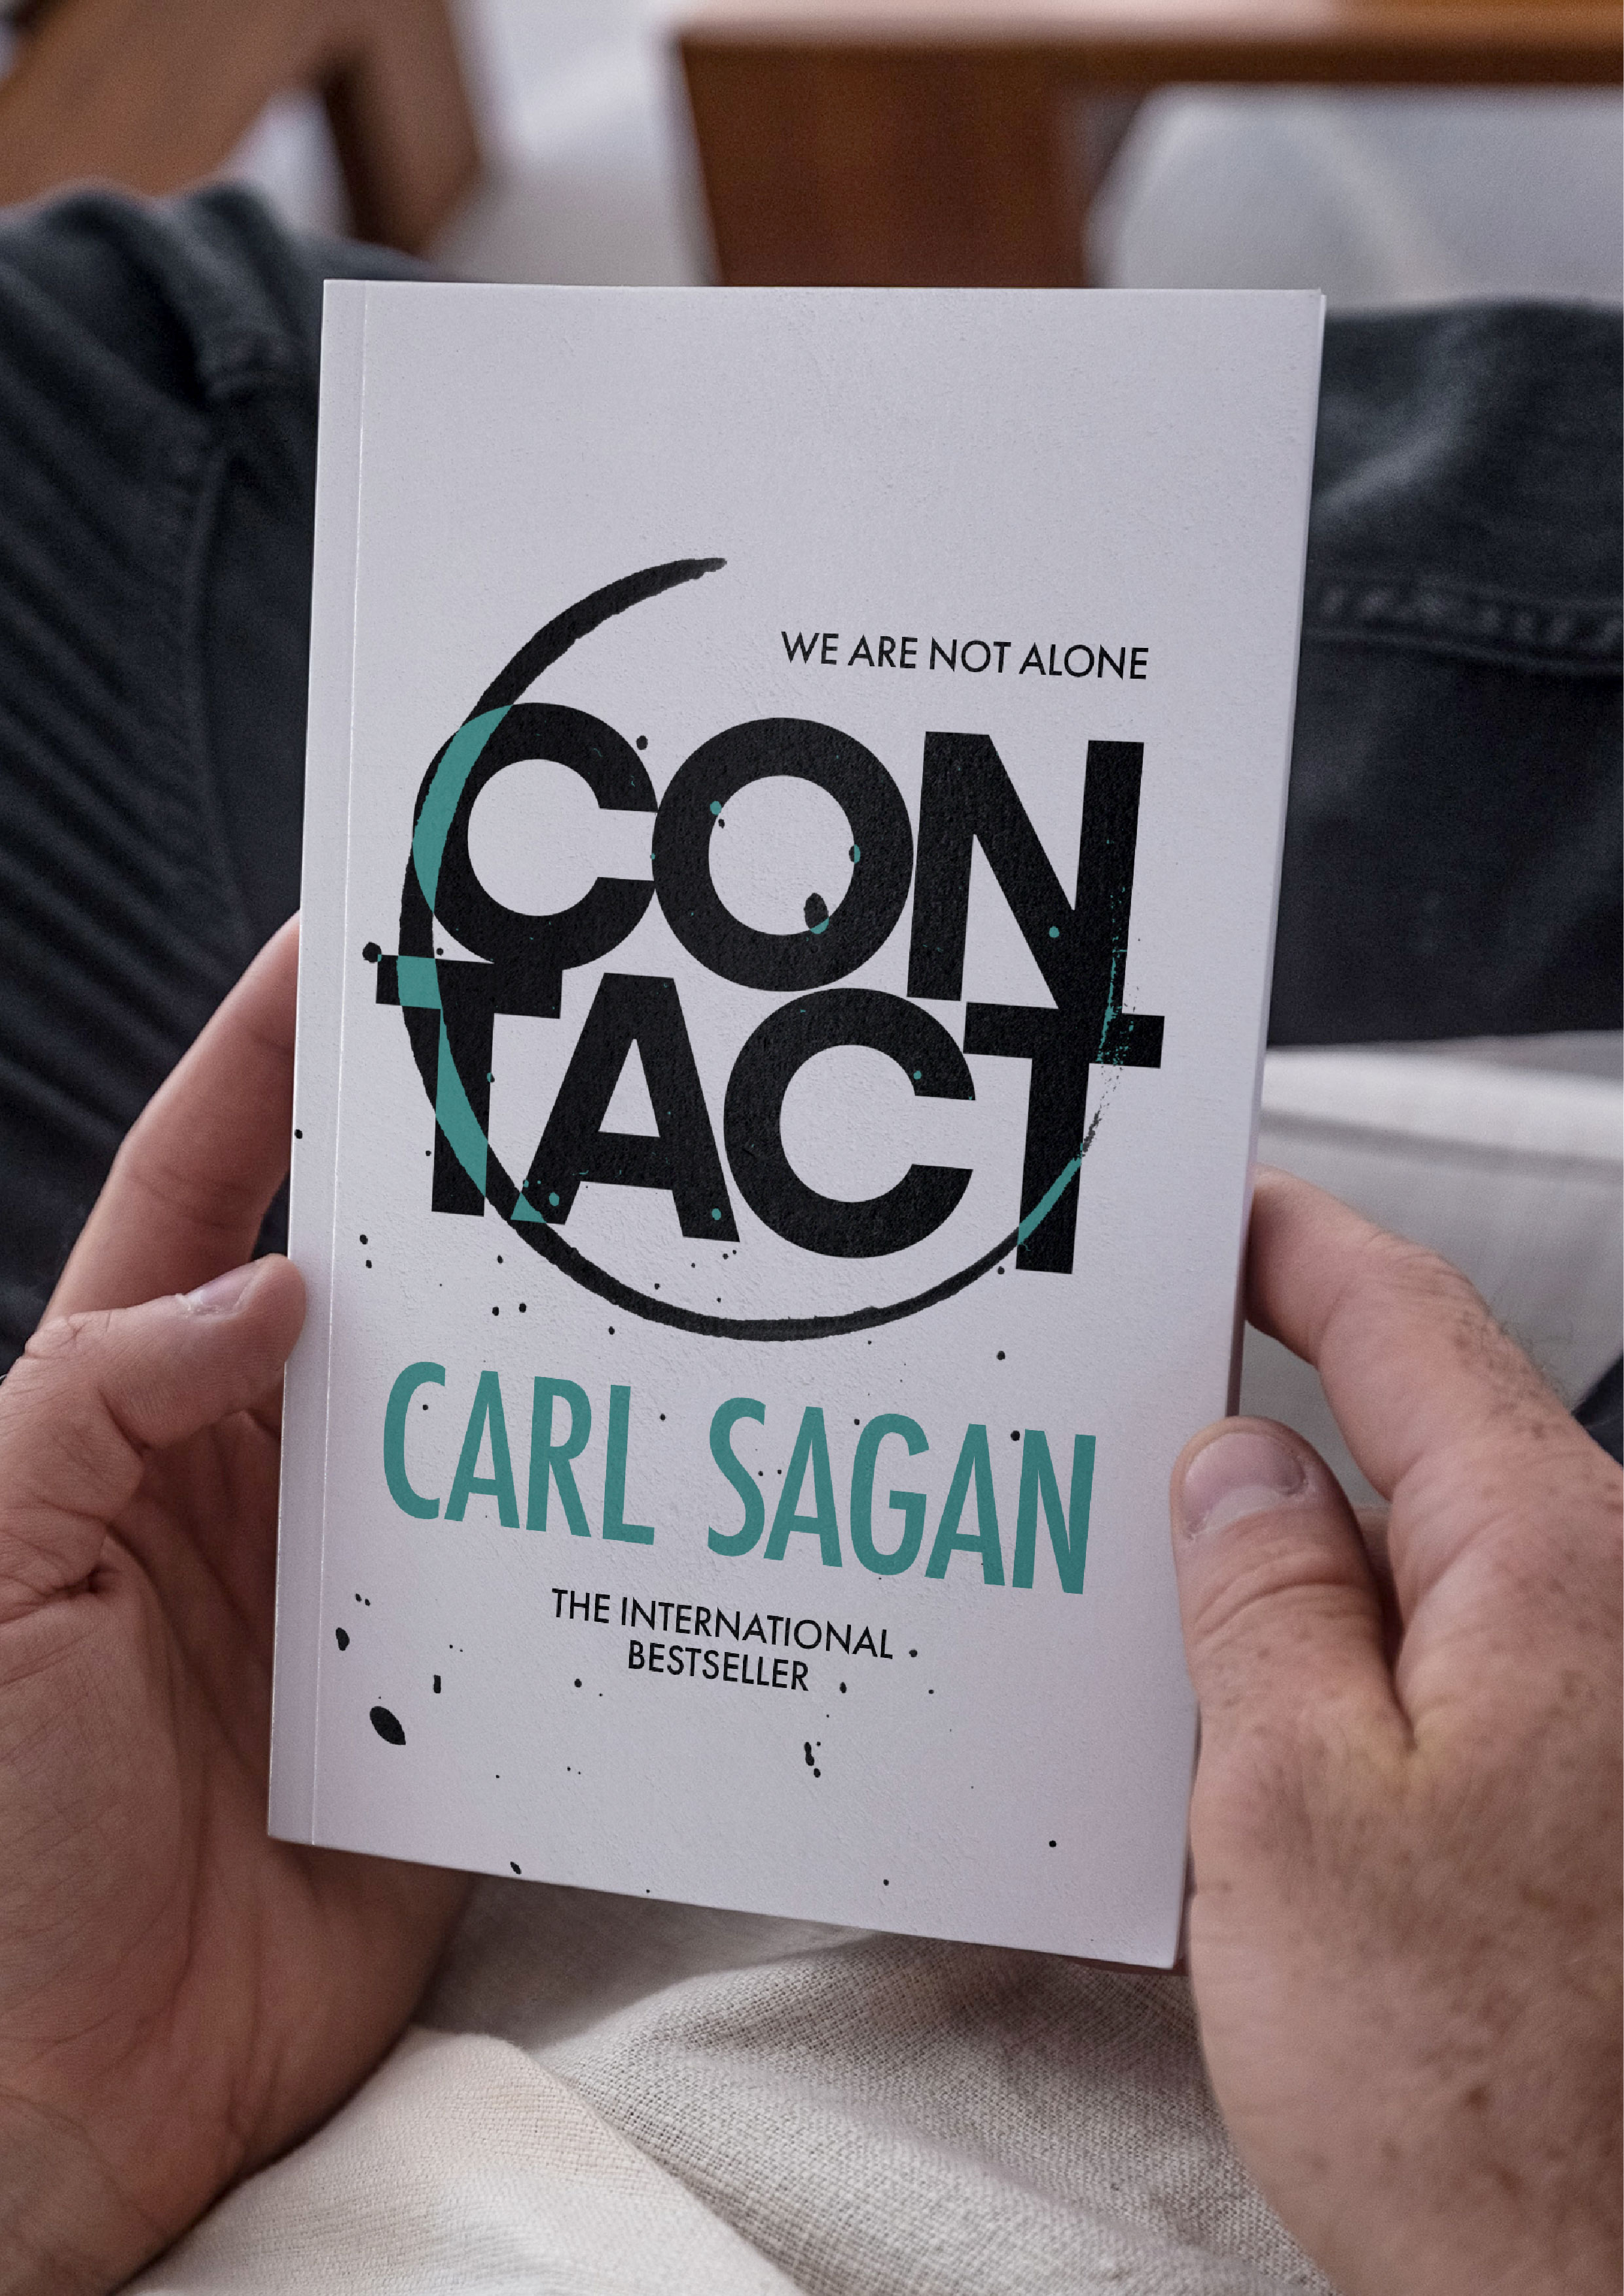 BA Design for Publishing work by Emily Shields showing the new book cover design for Contact by Carl Sagan.